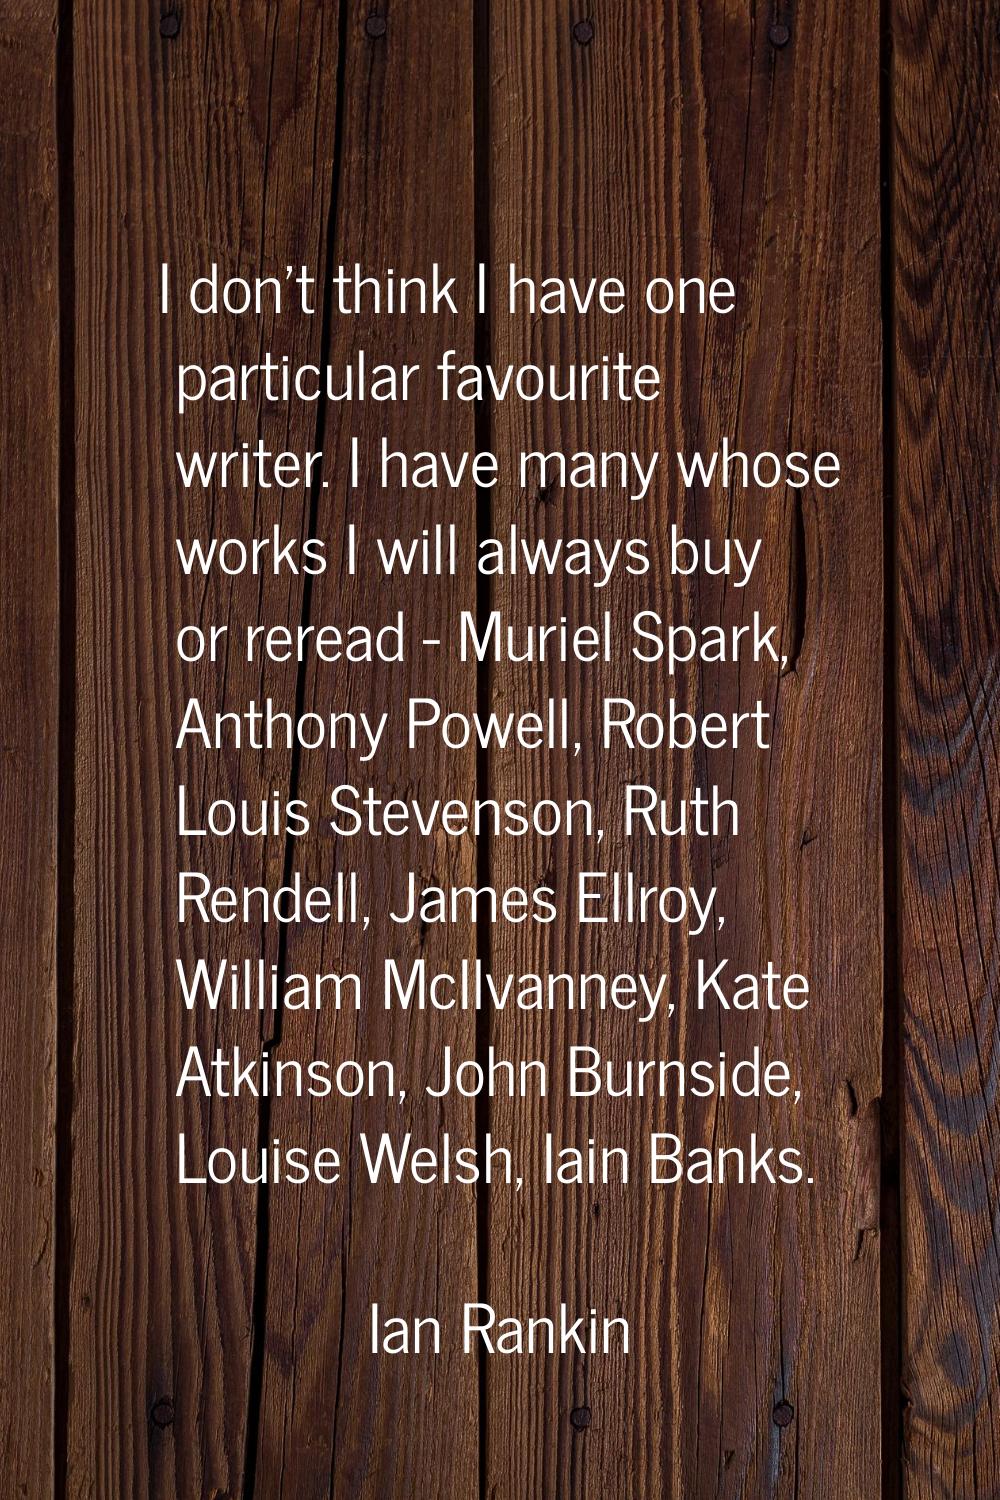 I don't think I have one particular favourite writer. I have many whose works I will always buy or 